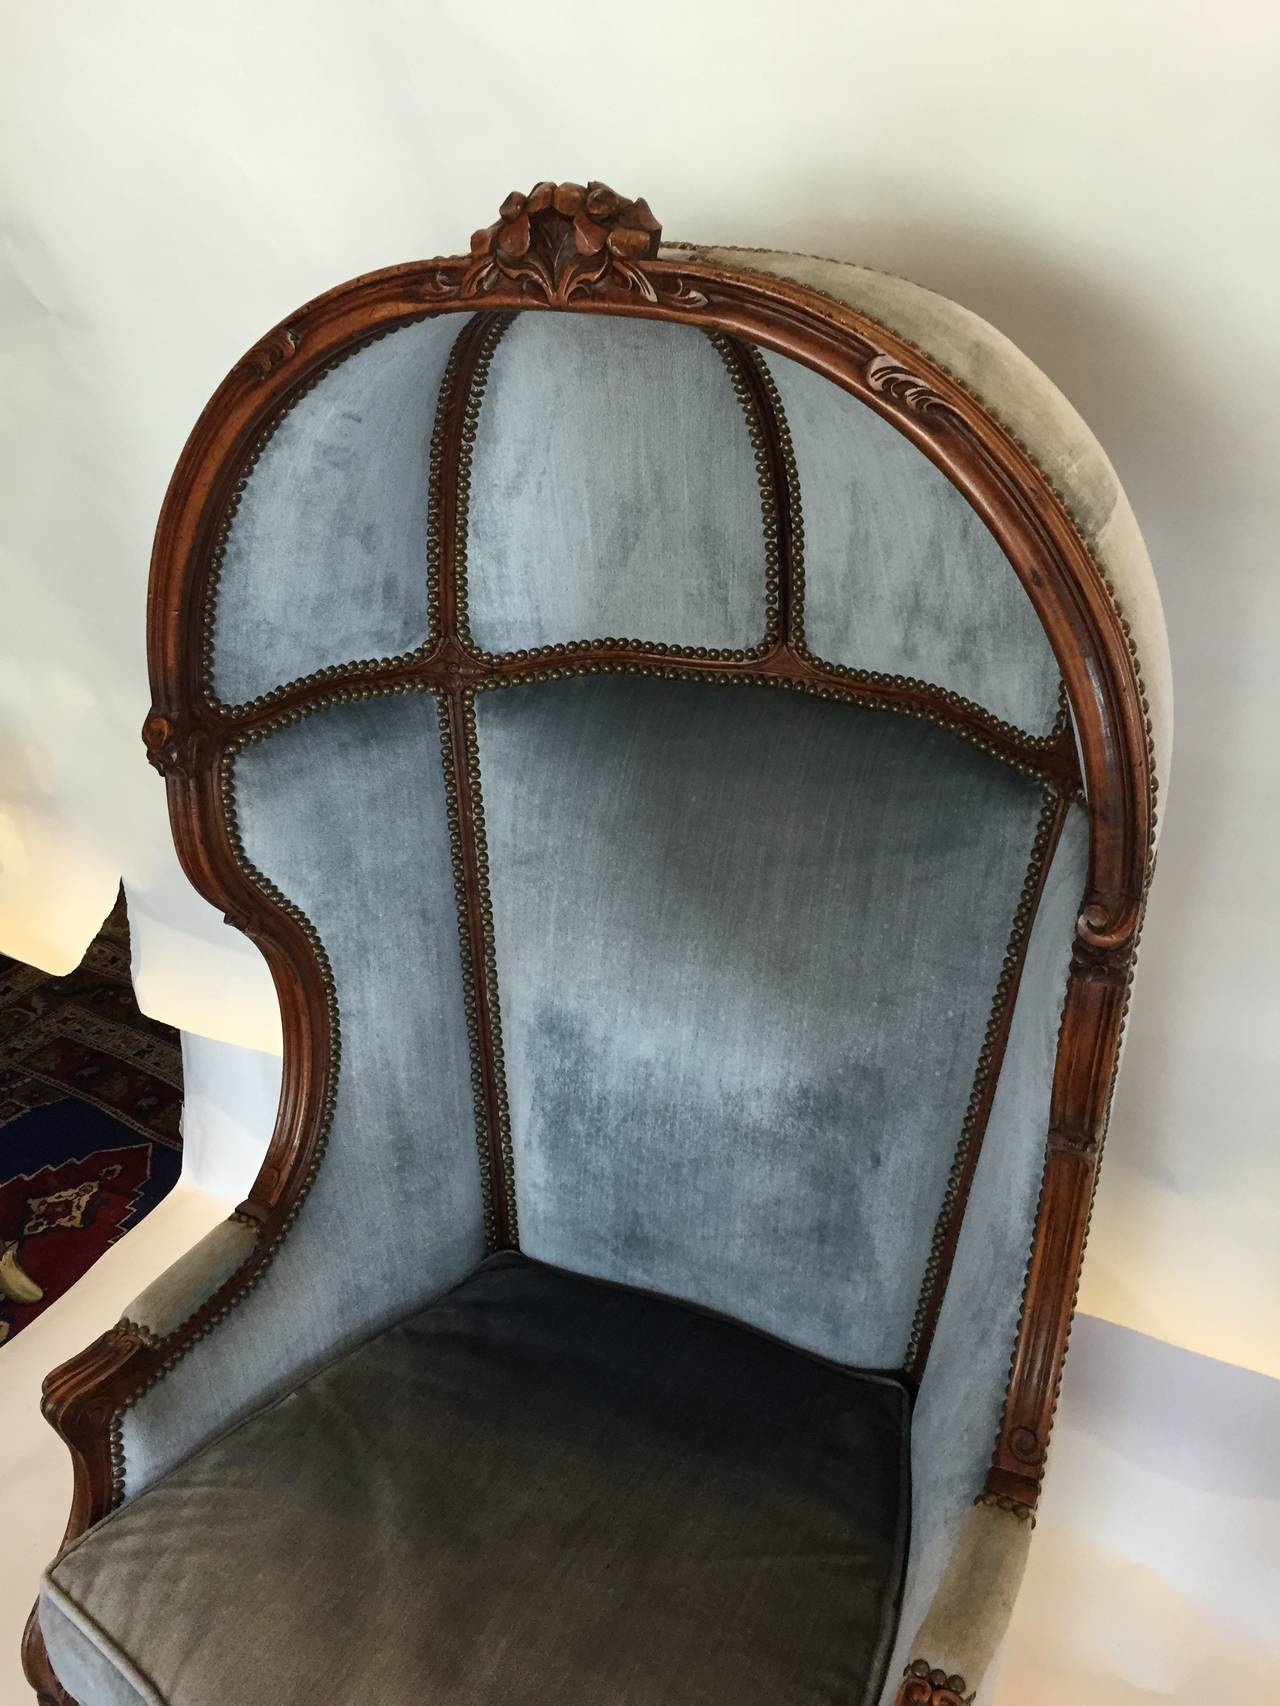 Original vintage velvet and carved wood, this canopy chair is a perfect accent for any modern design.